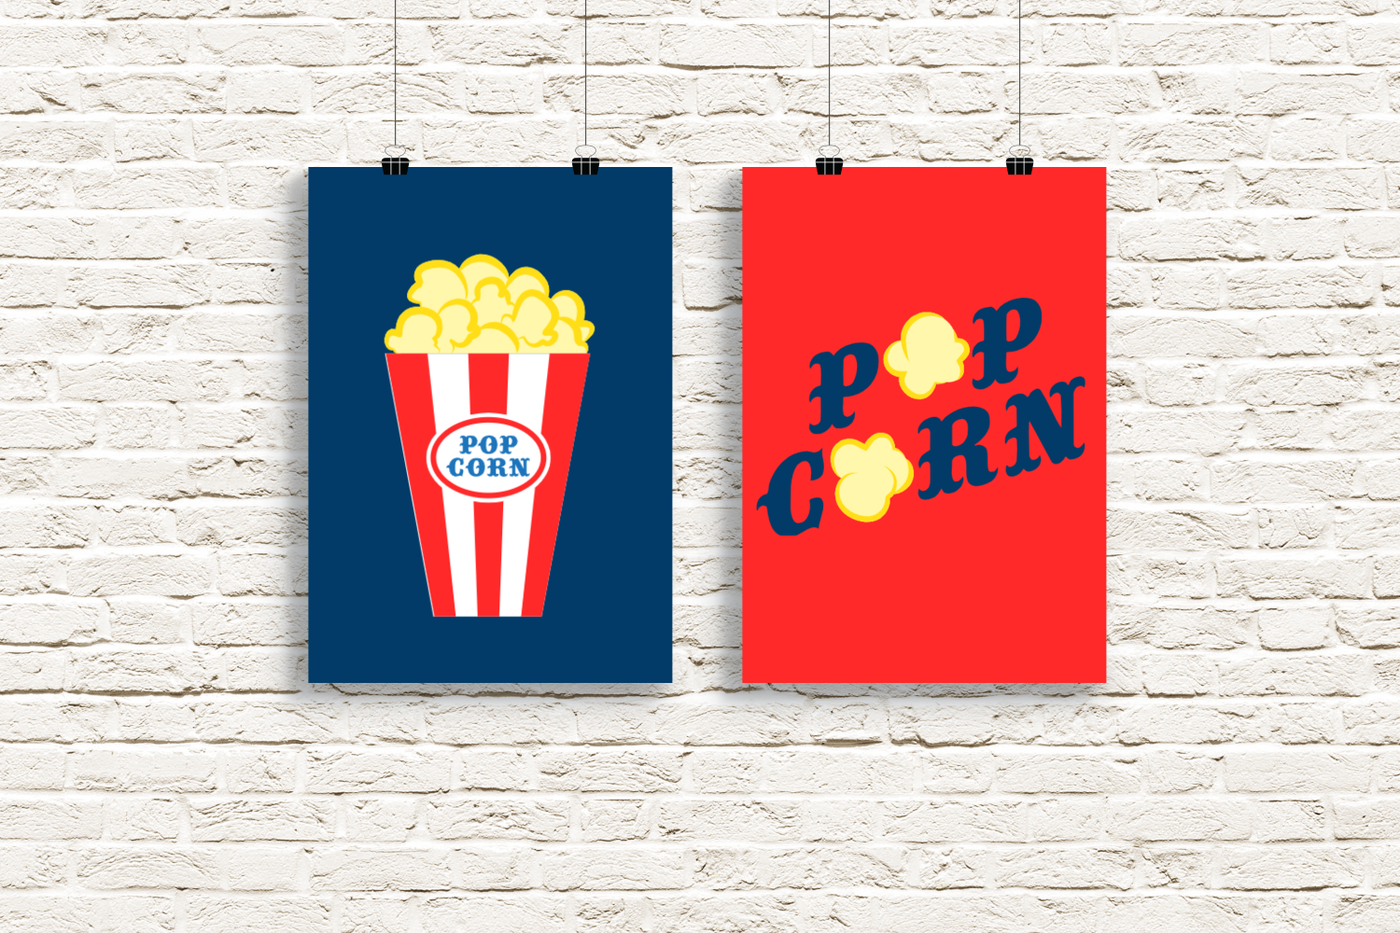 Popcorn design duo. One has a tub of popcorn, the other says "pop corn" with popcorn for the Os.